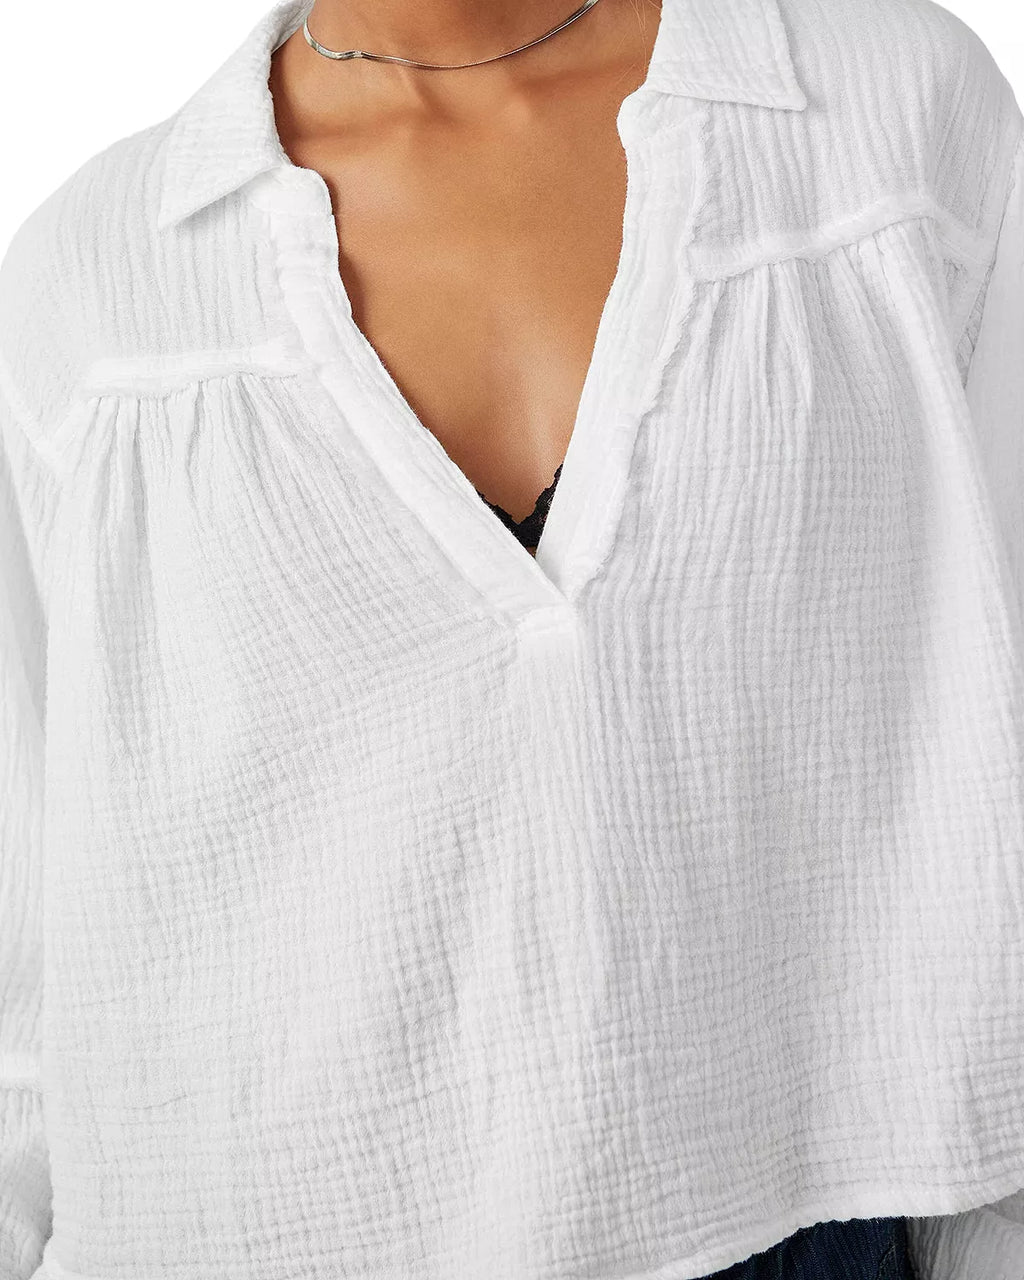 Free People Yucca Double Cloth Tee in Optic White